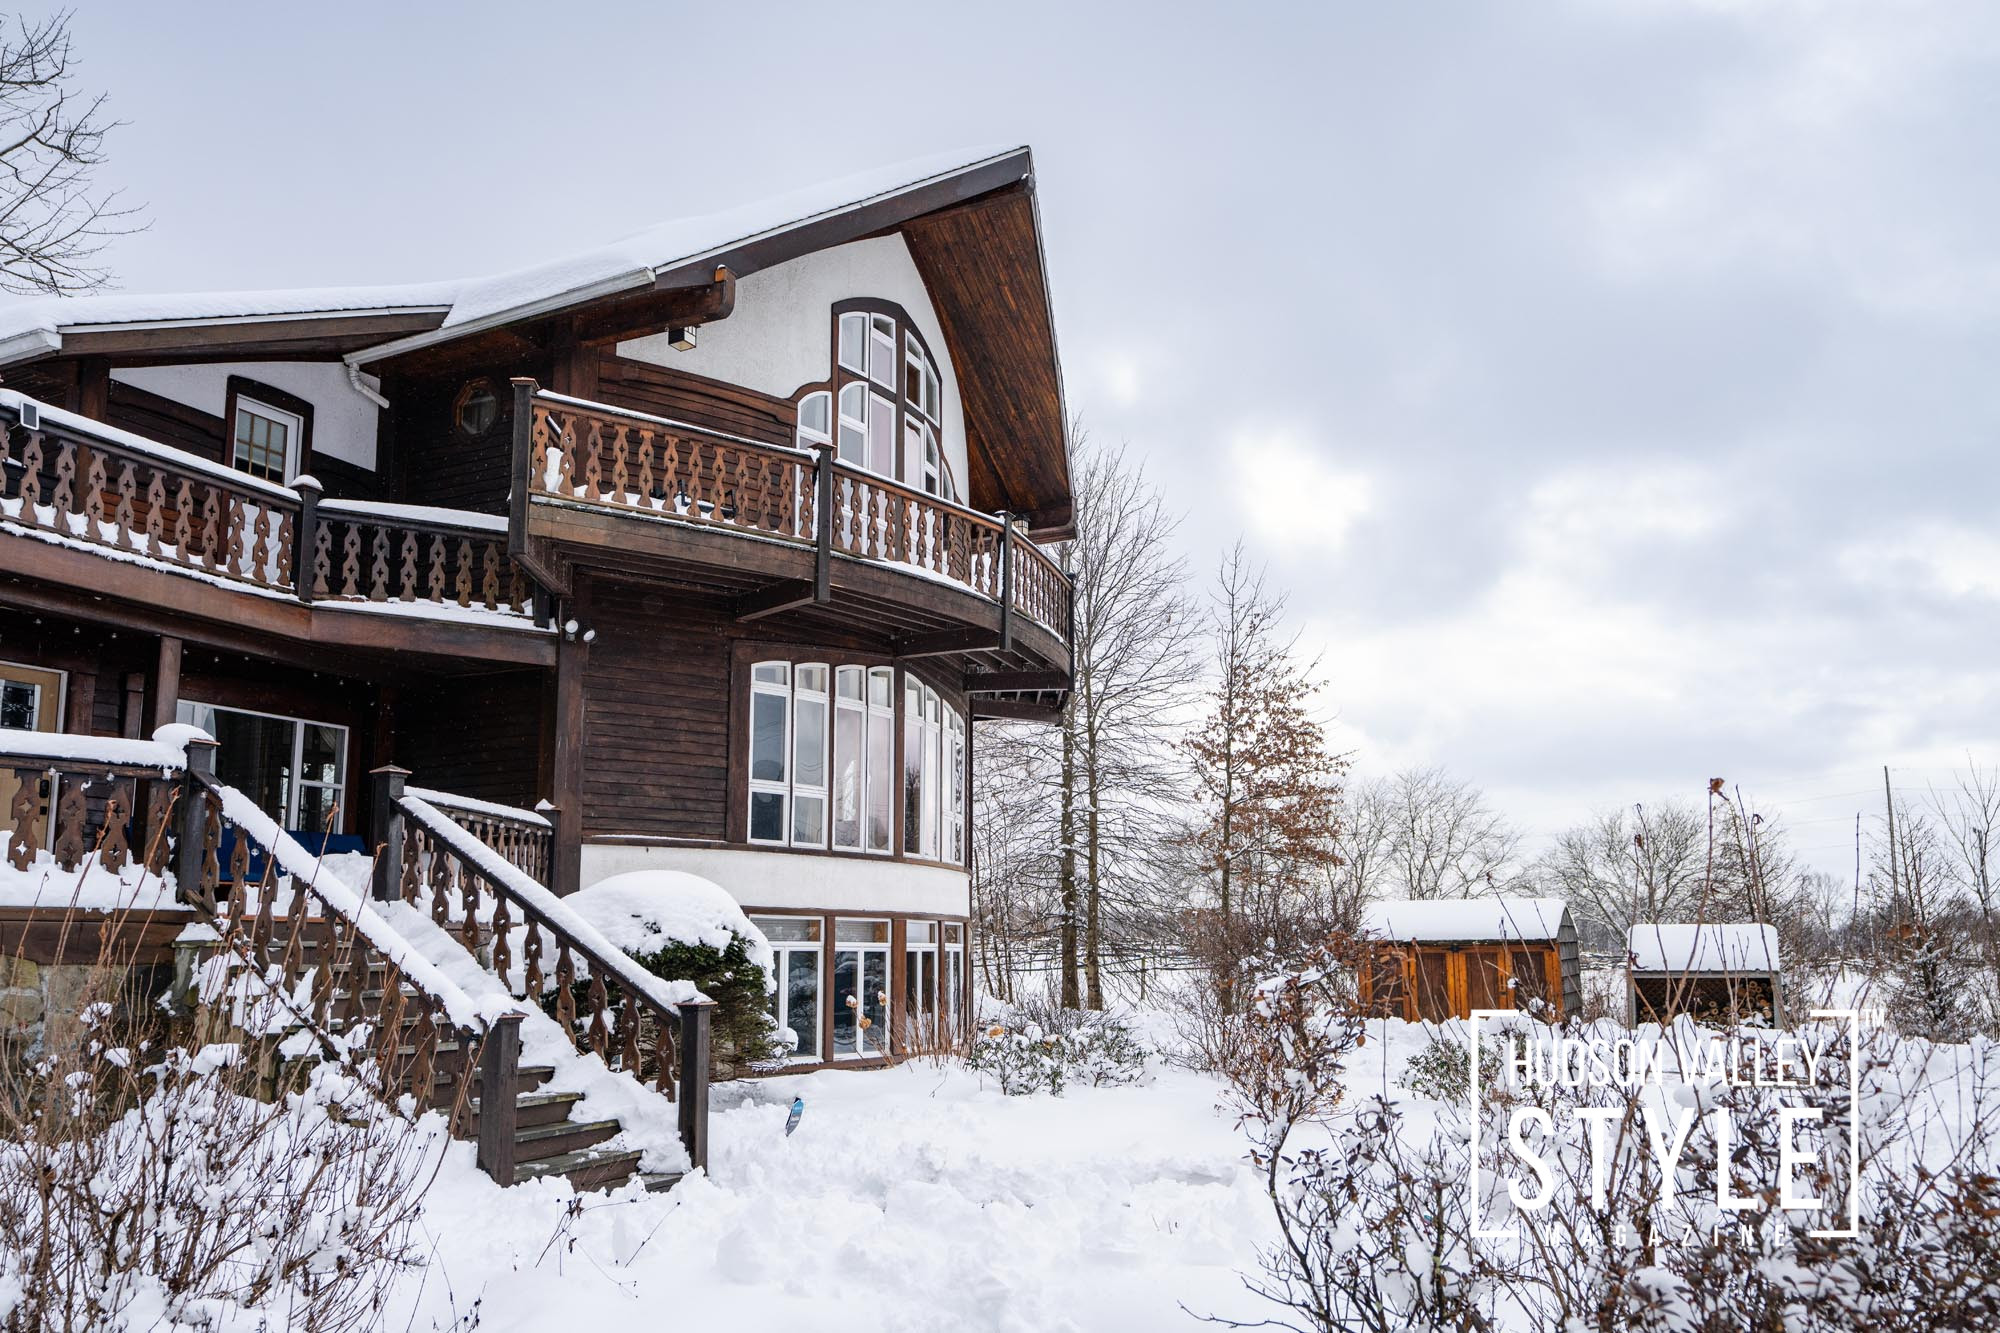 Escape the Crowds: Securing an Entire Airbnb Paradise in the Hudson Valley & Catskills this Winter – Presented by Alluvion Vacations